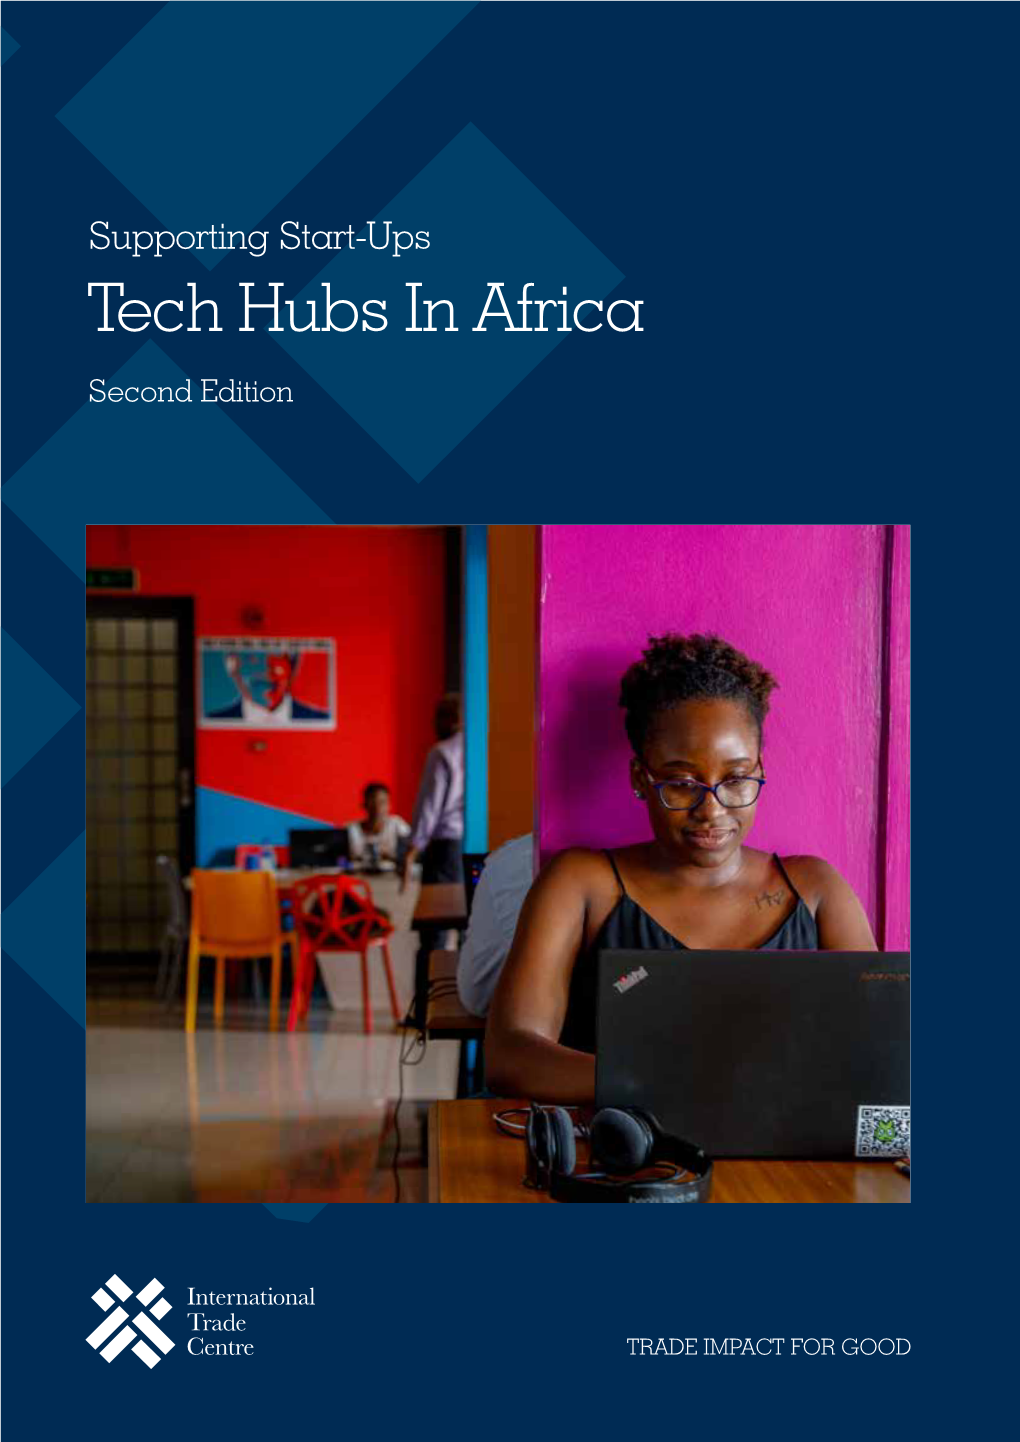 Supporting Start-Ups Tech Hubs in Africa